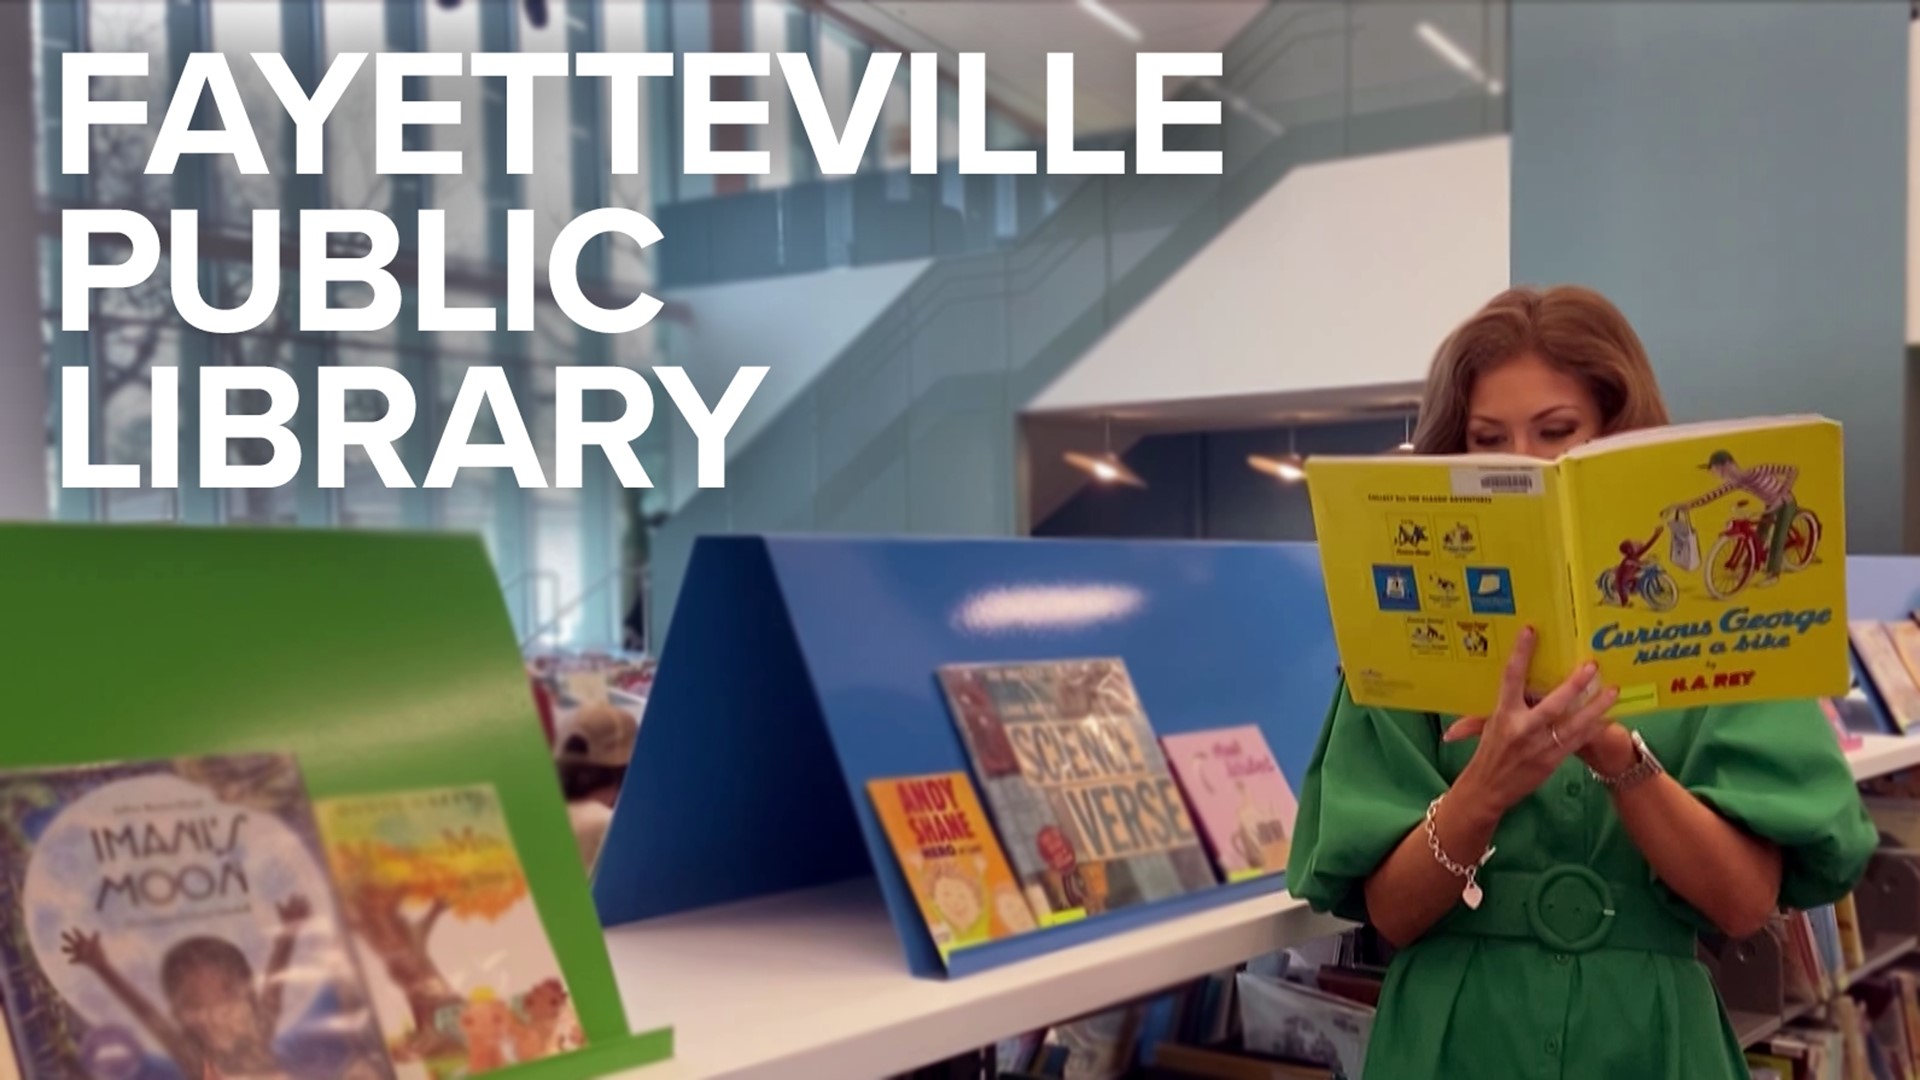 Does your library have a plane simulator, recording studio, or a virtual reality room? Fayetteville Public Library does, and more!